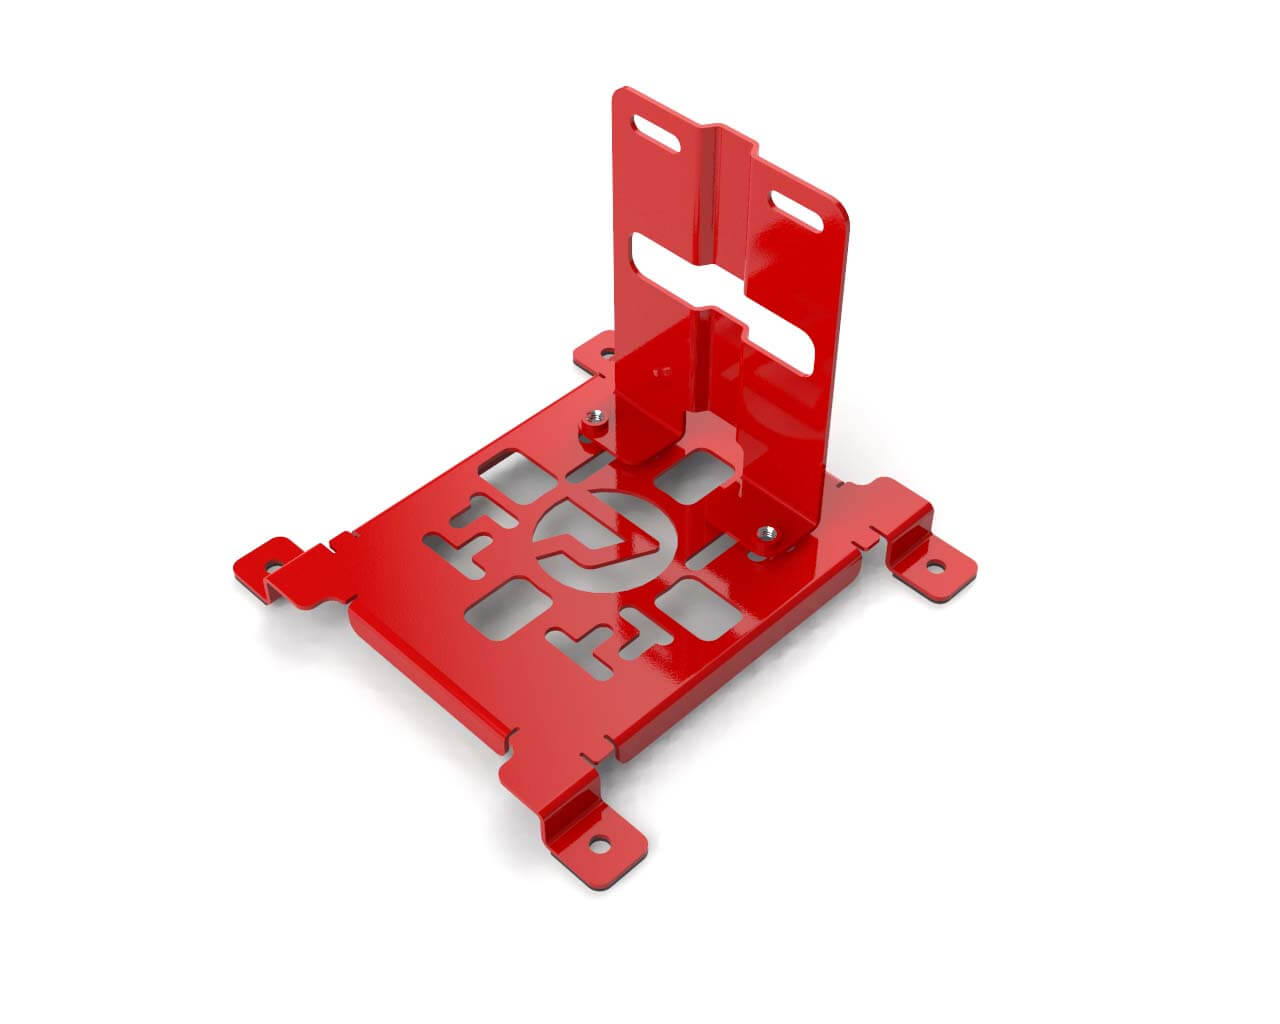 PrimoChill SX CTR2 Spider Mount Bracket Kit - 120mm Series - PrimoChill - KEEPING IT COOL Razor Red